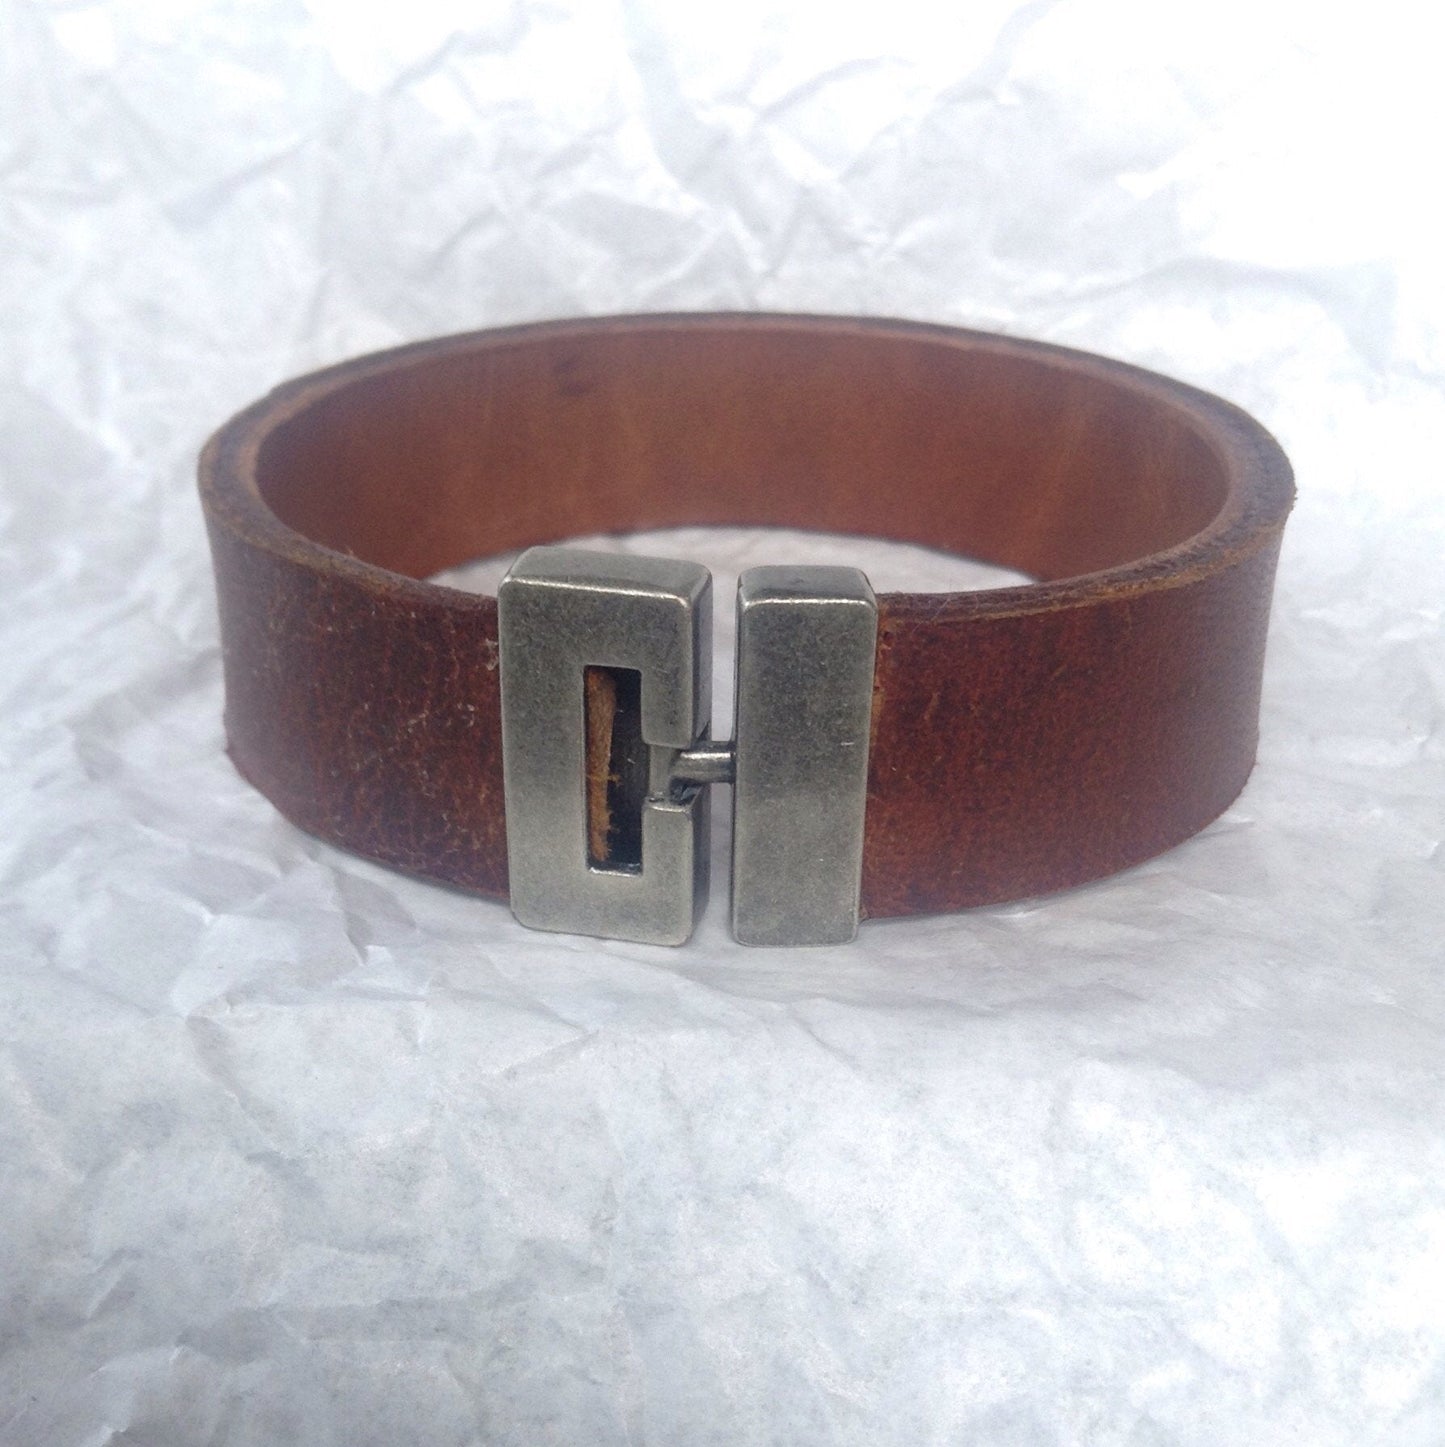 Oiled deerskin and caramel leather bracelet. T bar clasp.